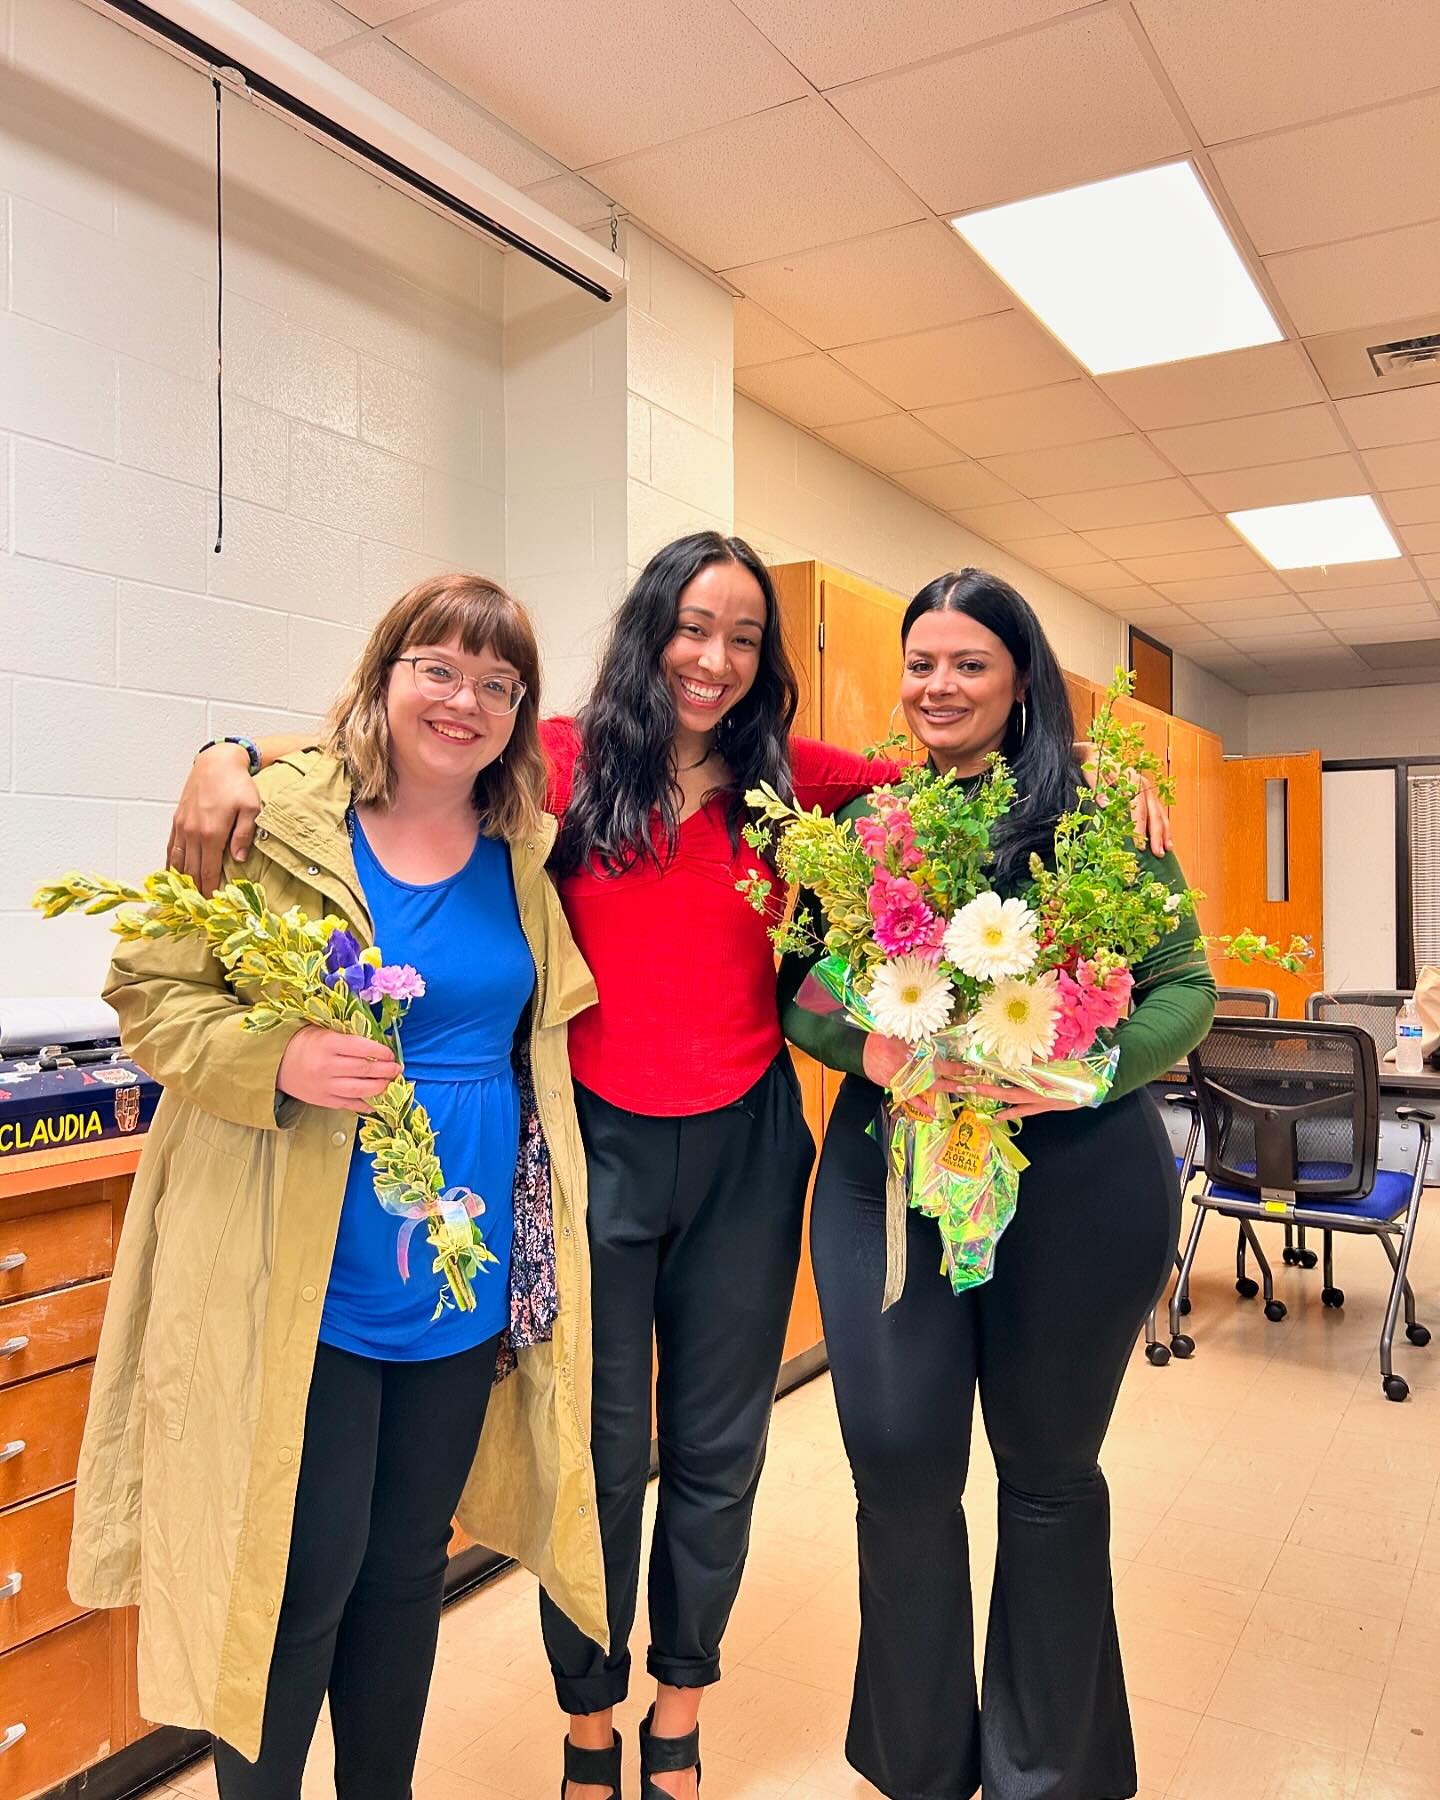 BUILD YOUR OWN BOUQUET TODAY FOR IPS!!! @ipsschools teachers are life changing. I&rsquo;m thankful to live in a city with such brave, committed, imperfect, honest, connected teachers. The next generation is in good hands. 

#themakingoffridas #fridas